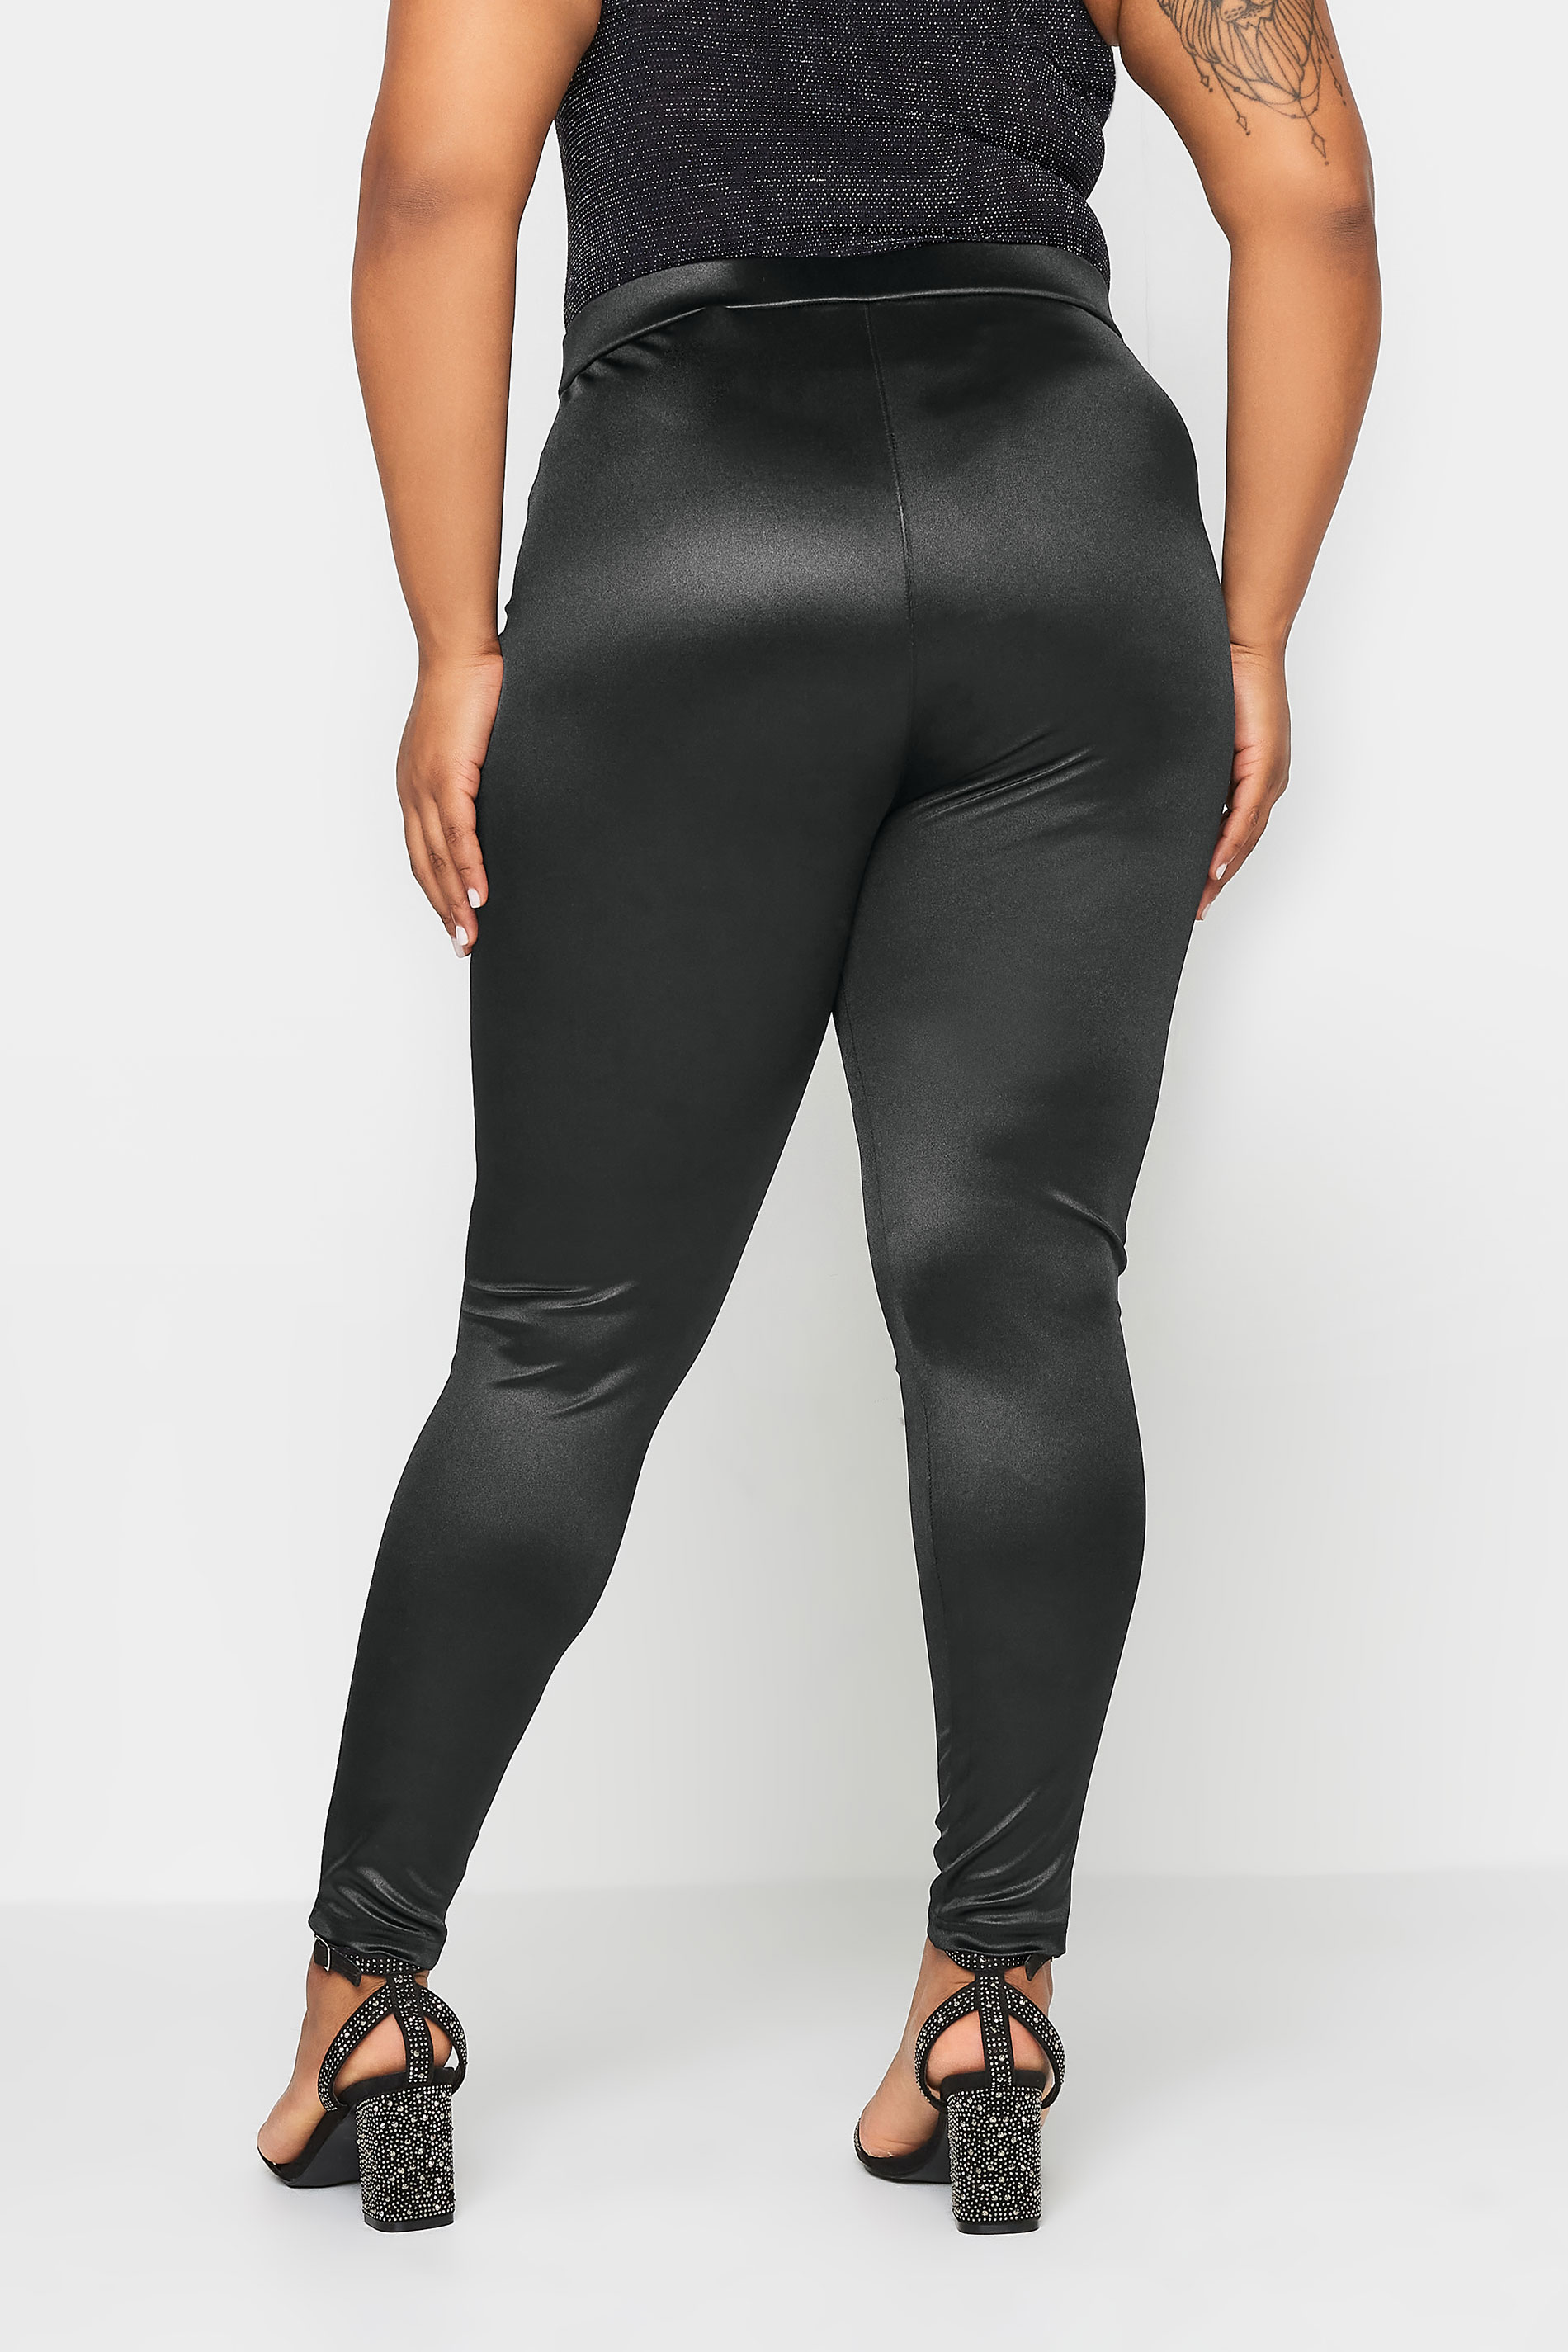 YOURS Plus Size Black Disco Leggings | Yours Clothing 3